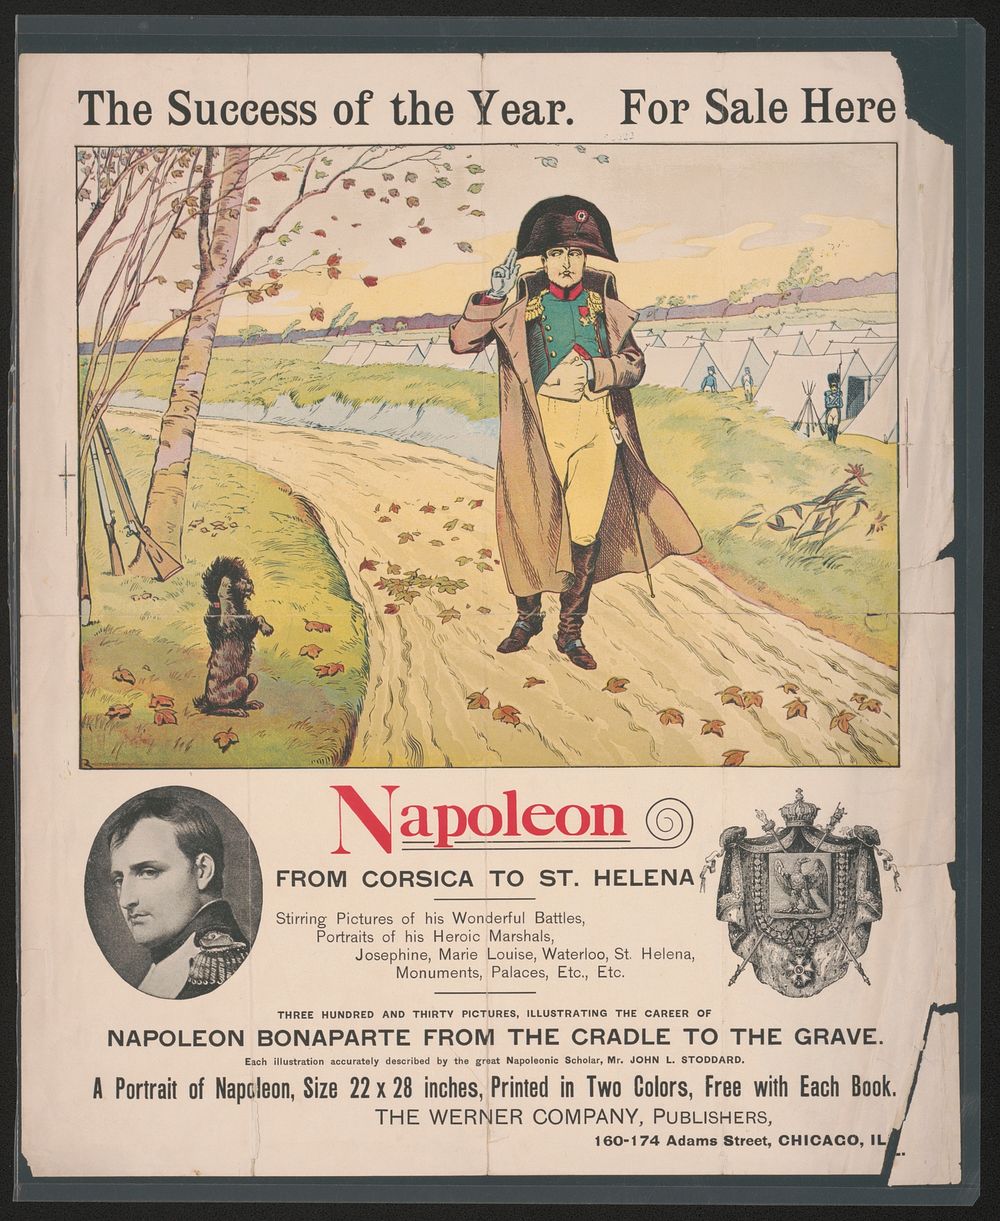 Napoleon from Corsica to St. Helena The success of the year. For sale here.